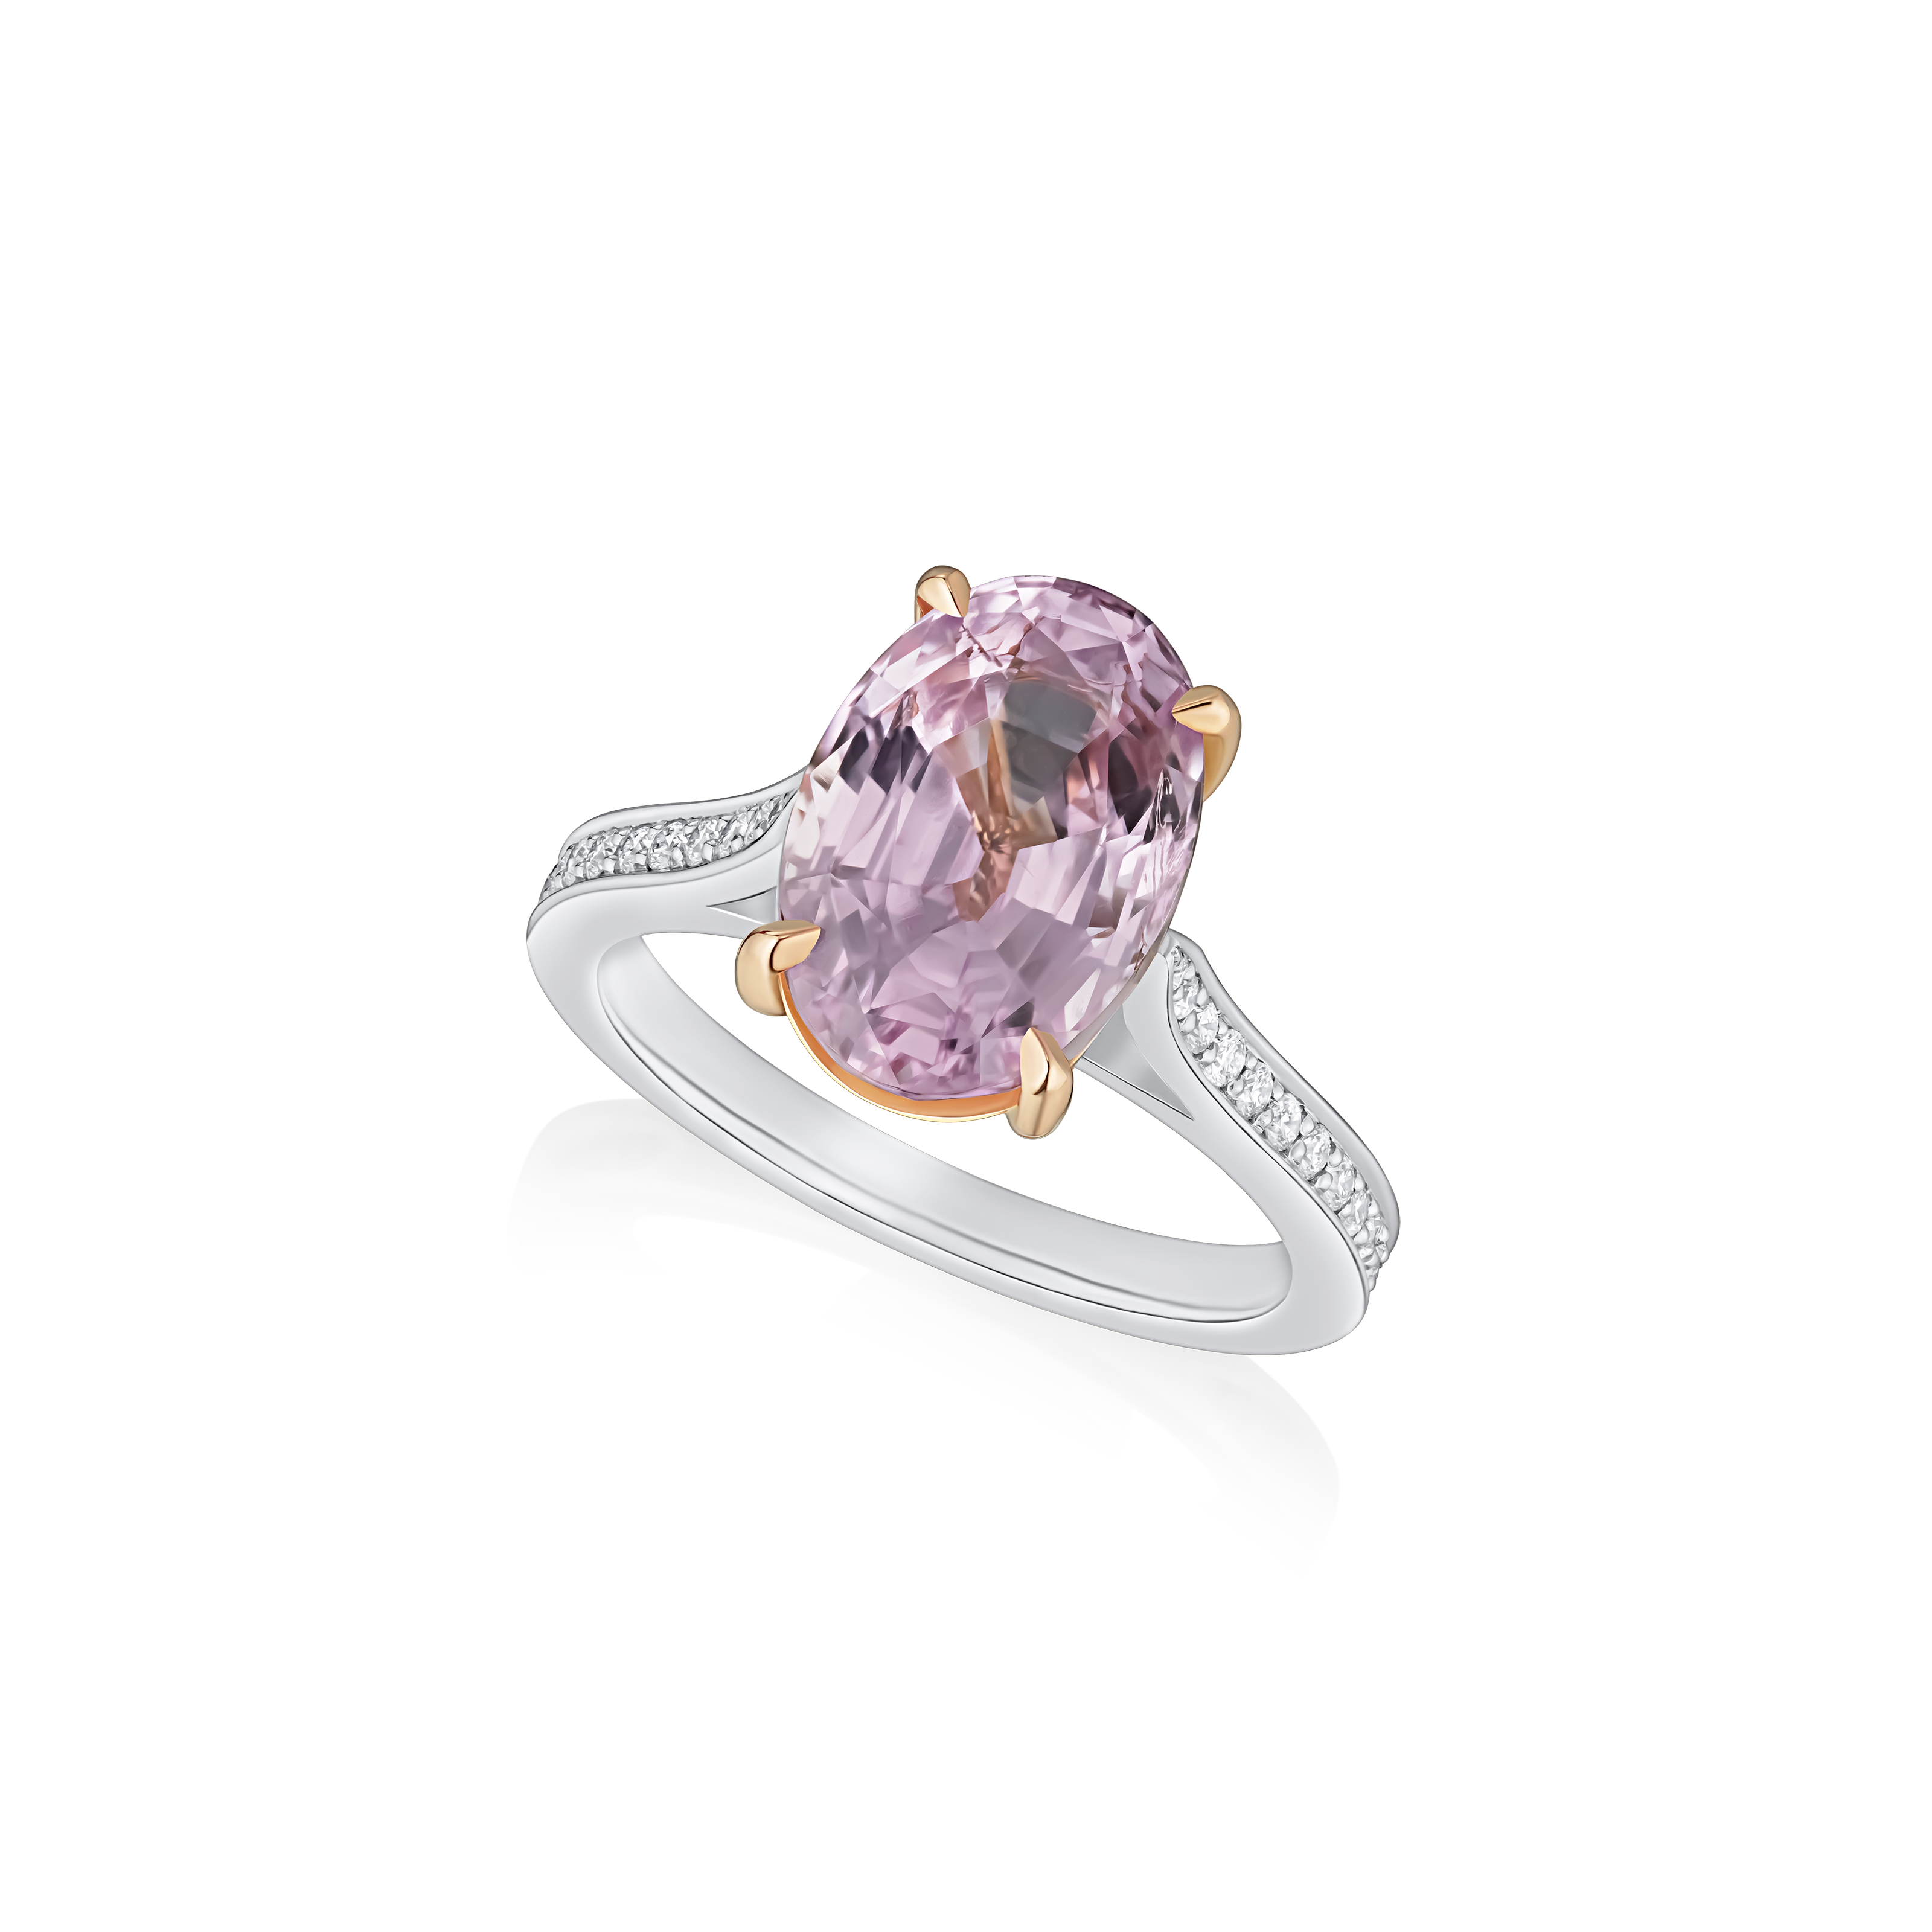 6.34cts Pink Sapphire and Diamond Ring